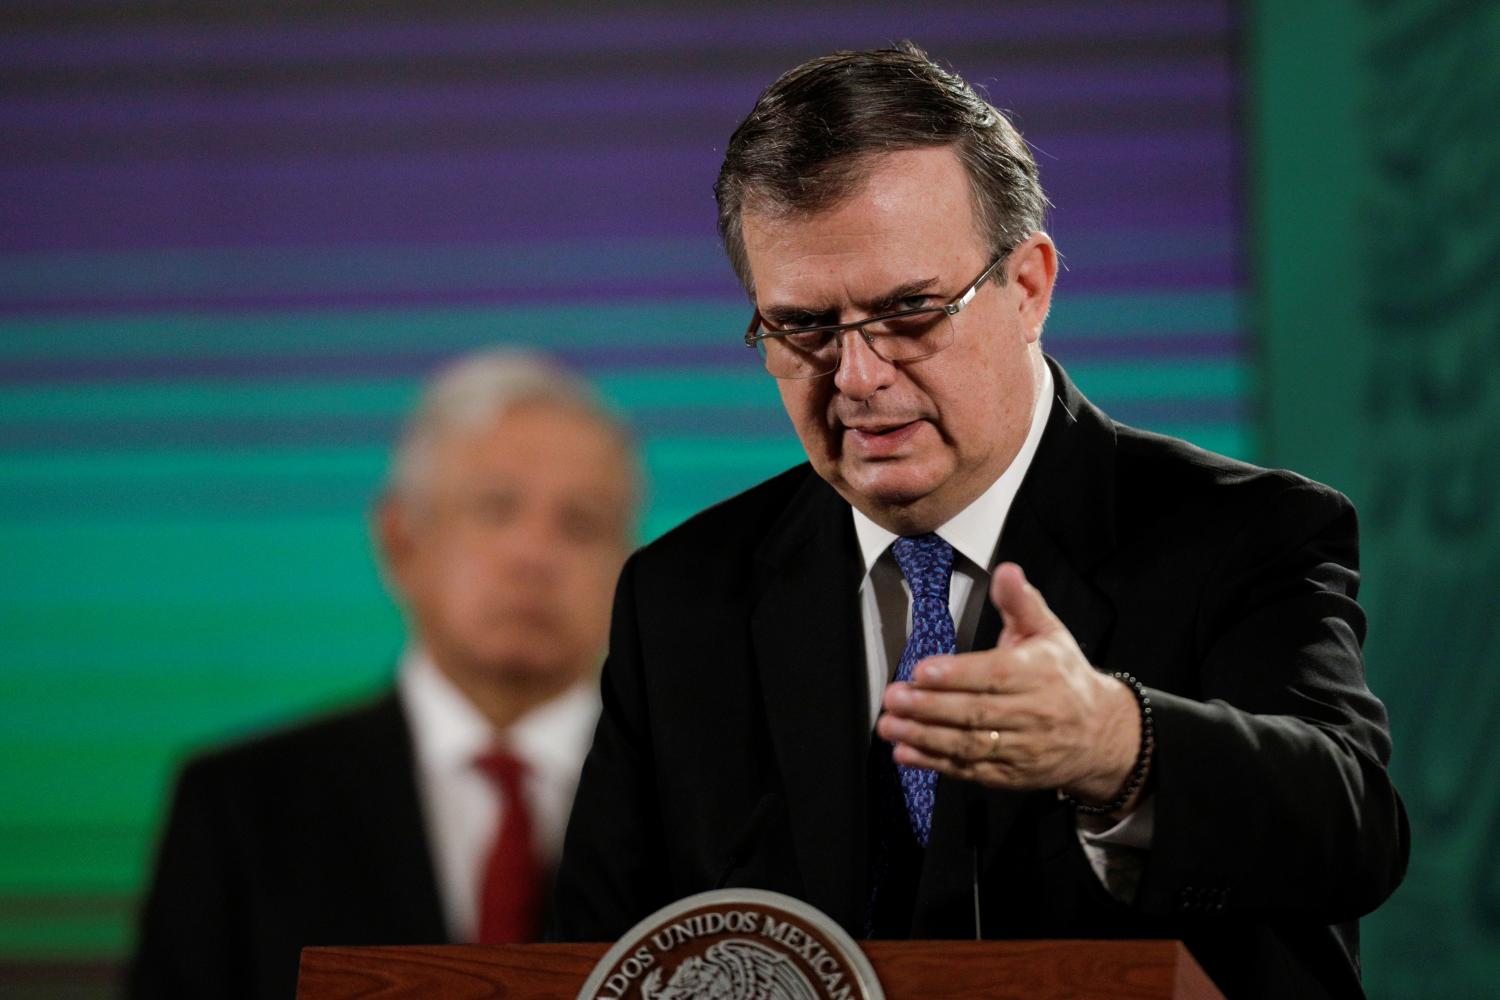 Mexican Foreign Minister Marcelo Ebrard speaks during a news conference as Mexico aims to gradually lift pandemic-induced restrictions on its shared border with the United States as it progresses in vaccinating the local population against the coronavirus disease (COVID-19), at the National Palace in Mexico City, Mexico June 15, 2021. REUTERS/Luis Cortes